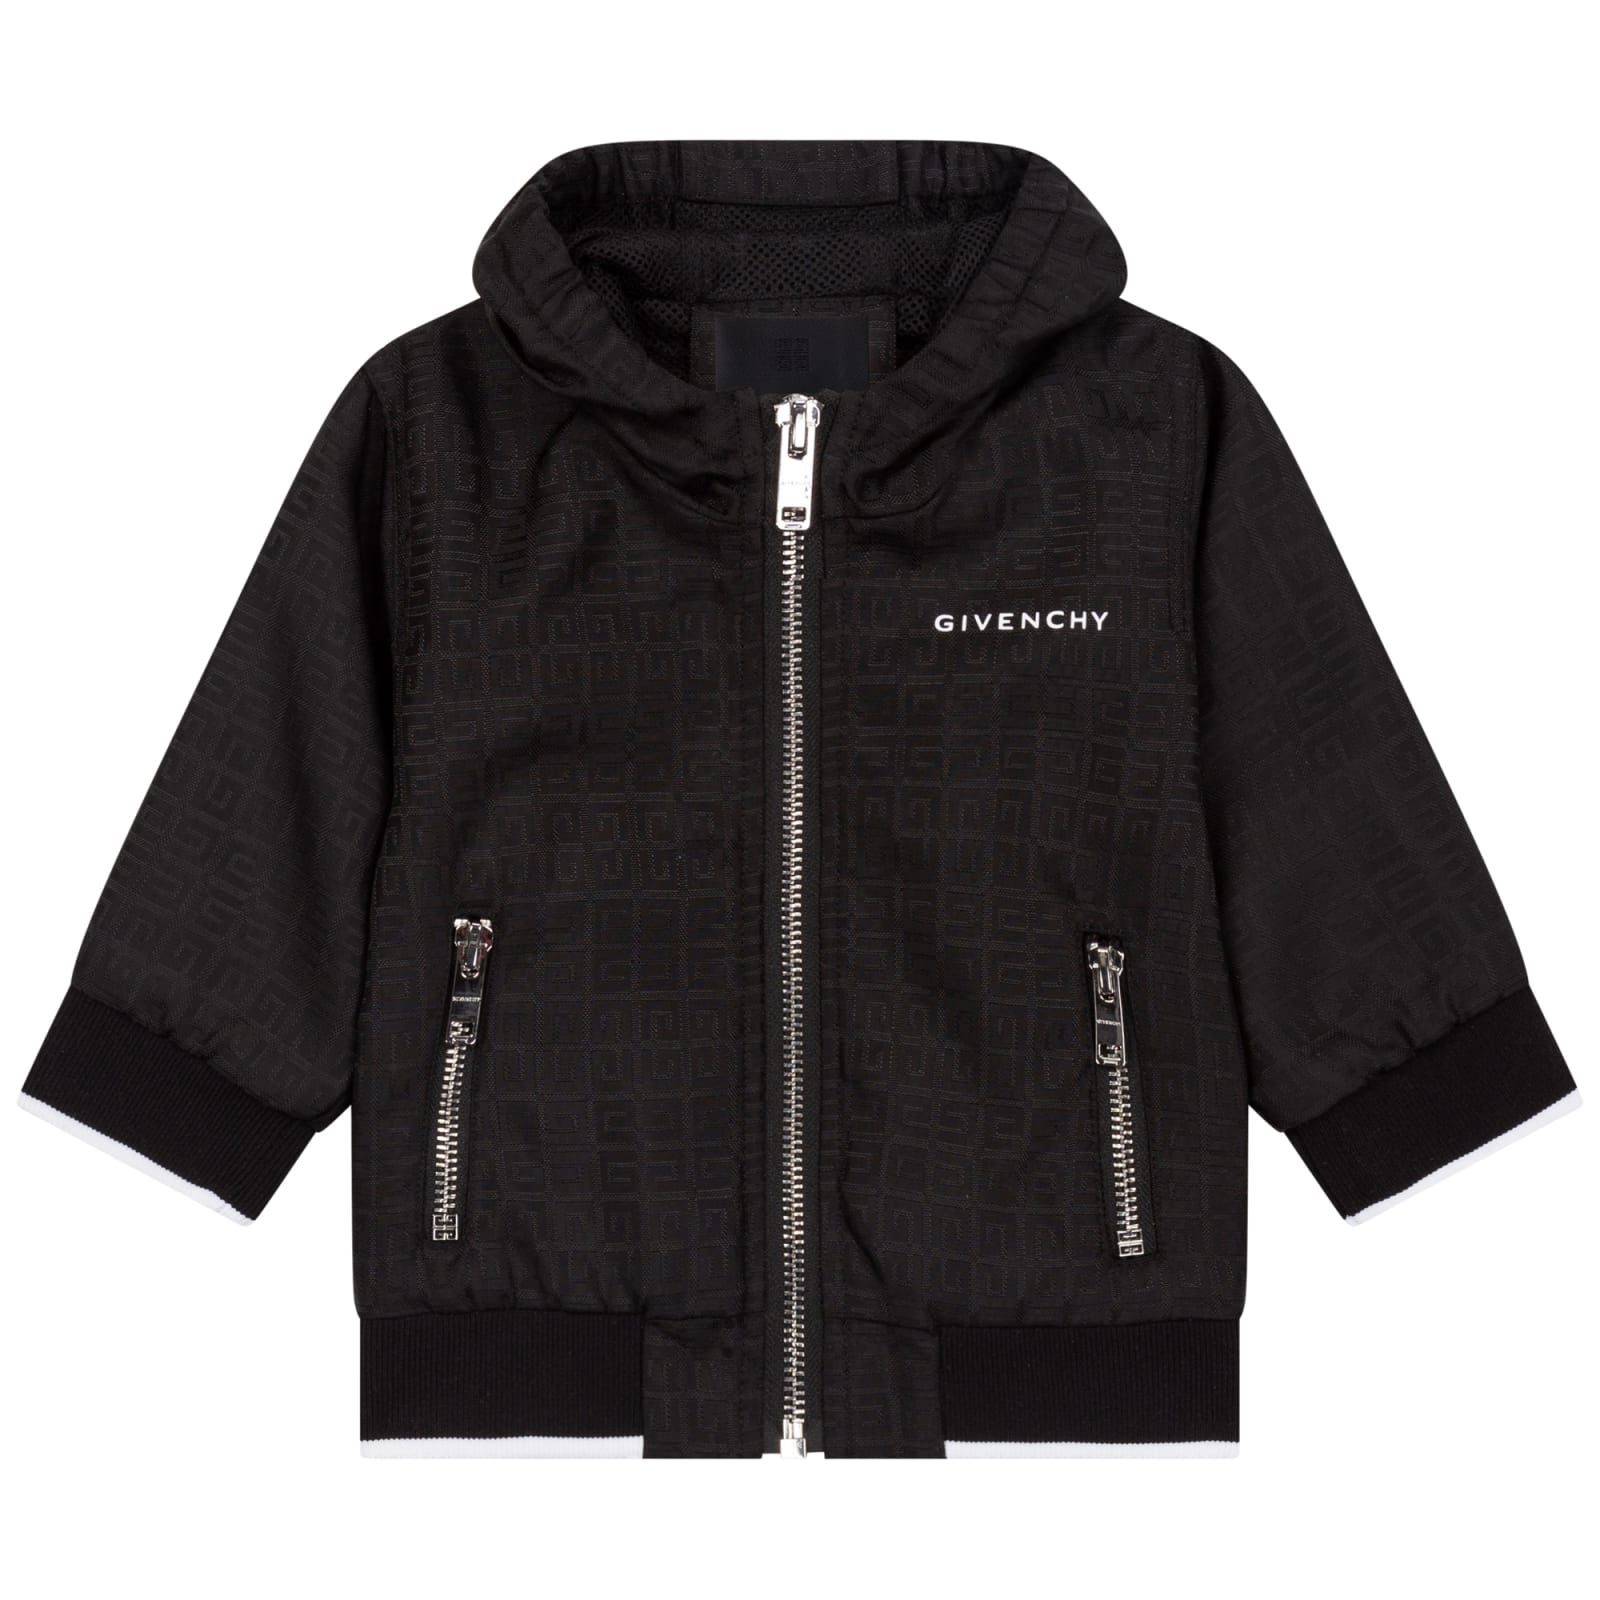 Givenchy Jacket With Zip